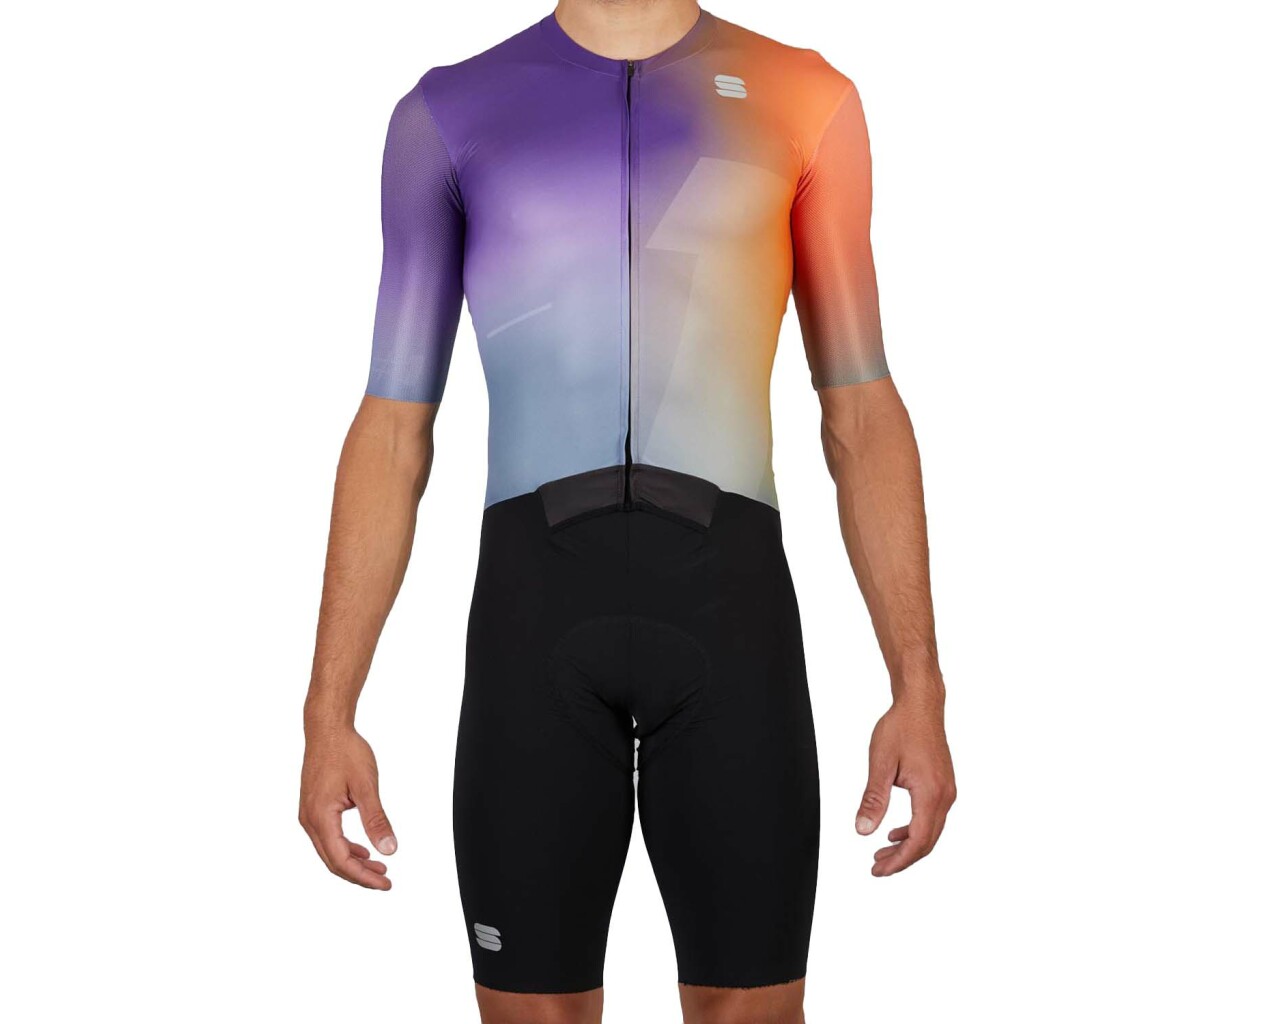 Sportful Bomber Suit | Merlin Cycles